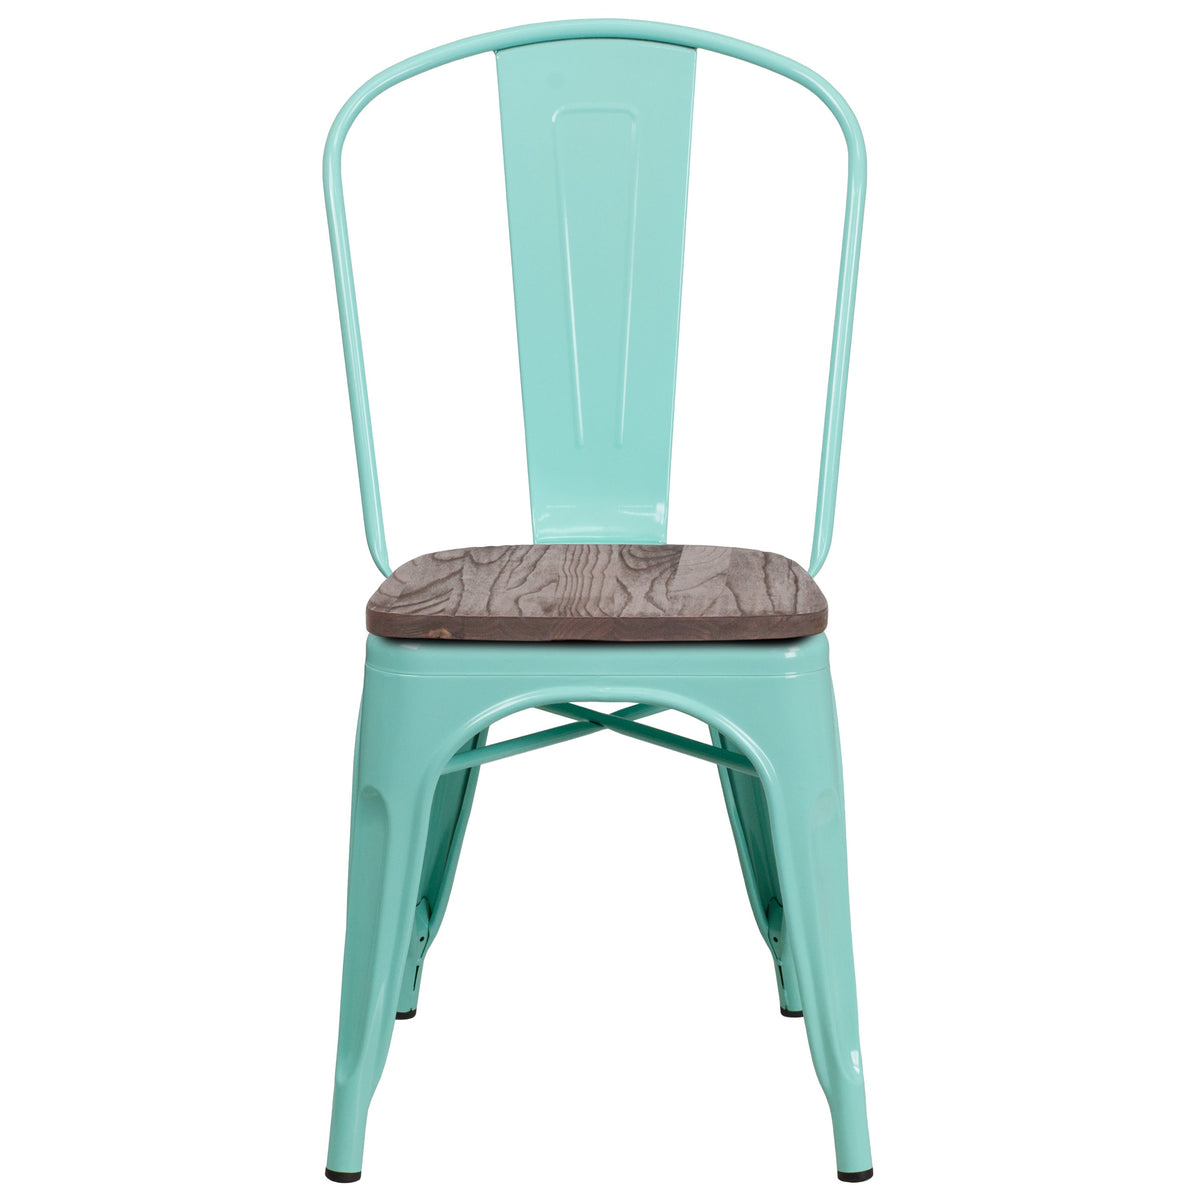 Mint Green |#| Mint Green Metal Stackable Chair with Wood Seat - Kitchen Furniture - Café Chair